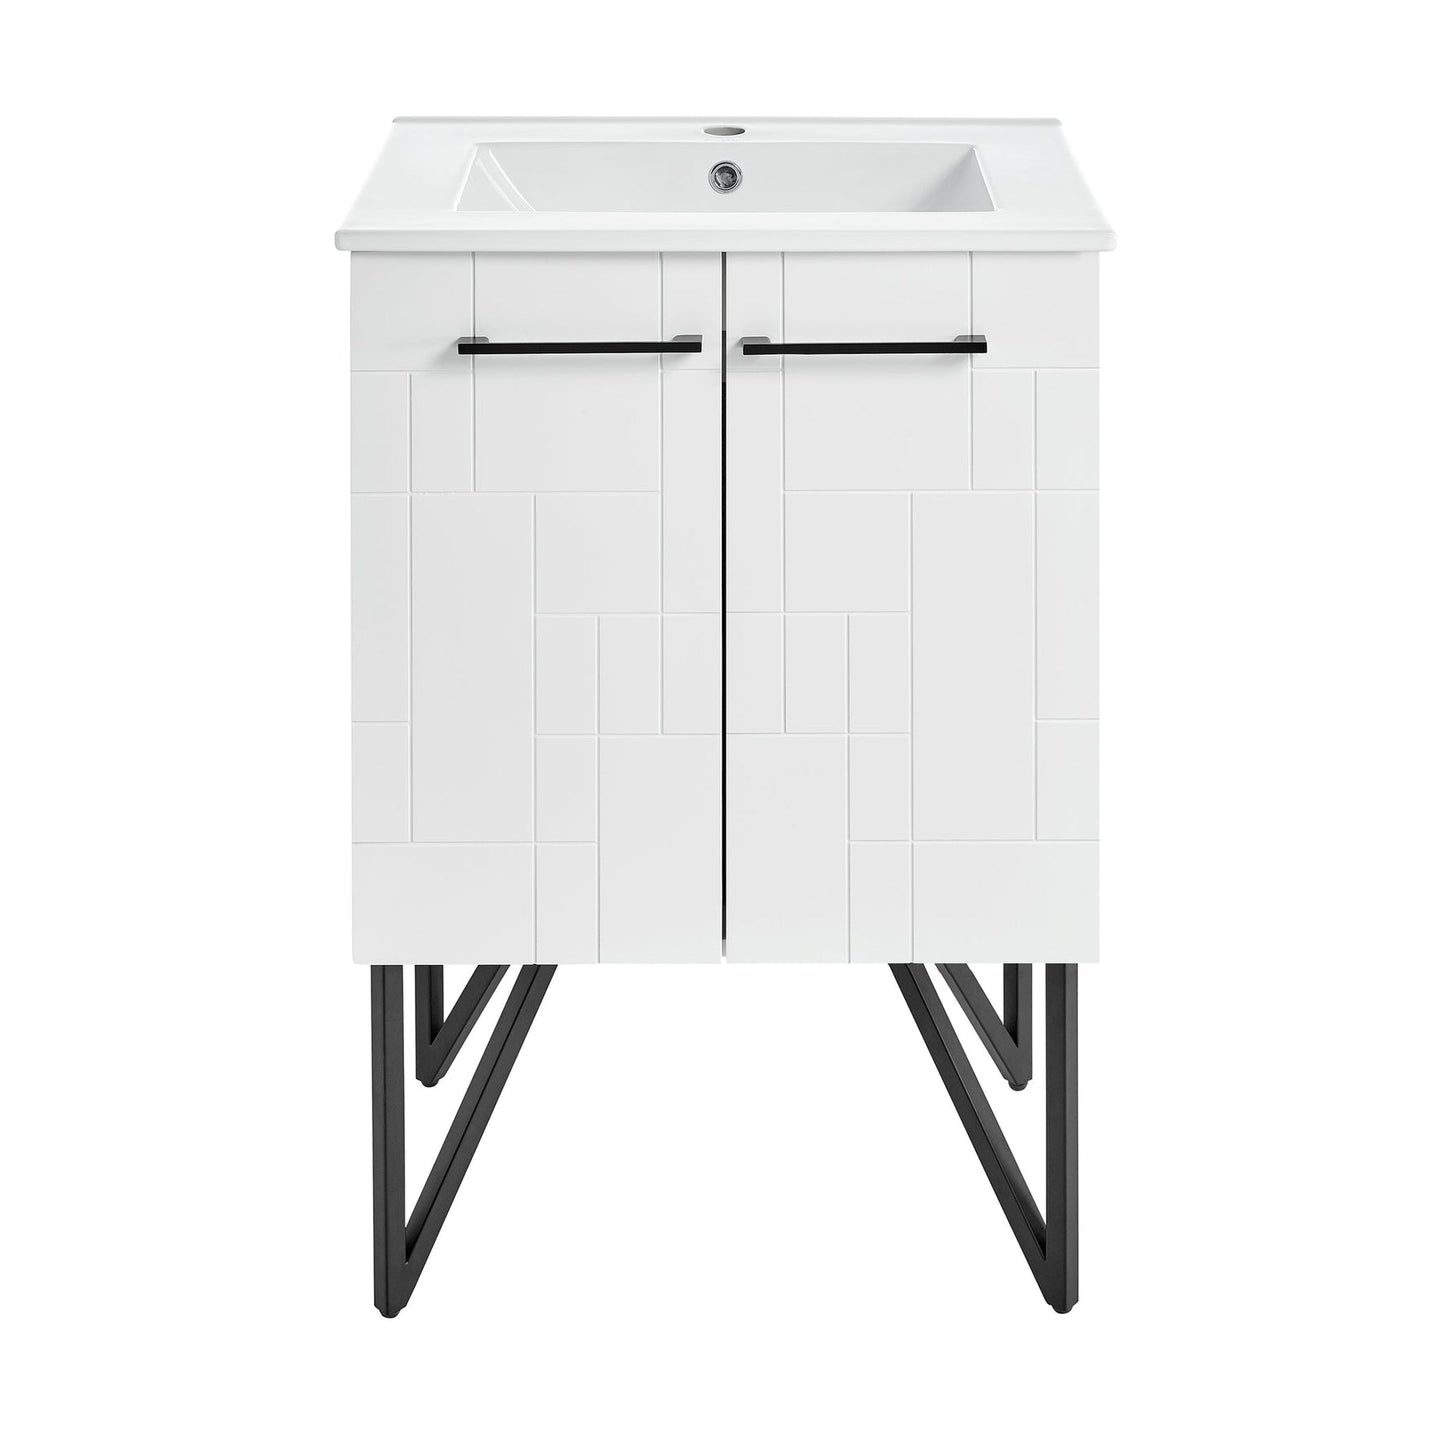 Swiss Madison Annecy 24" x 35" Freestanding Mondrian White Bathroom Vanity With Ceramic Single Sink and Stainless Steel Metal Legs